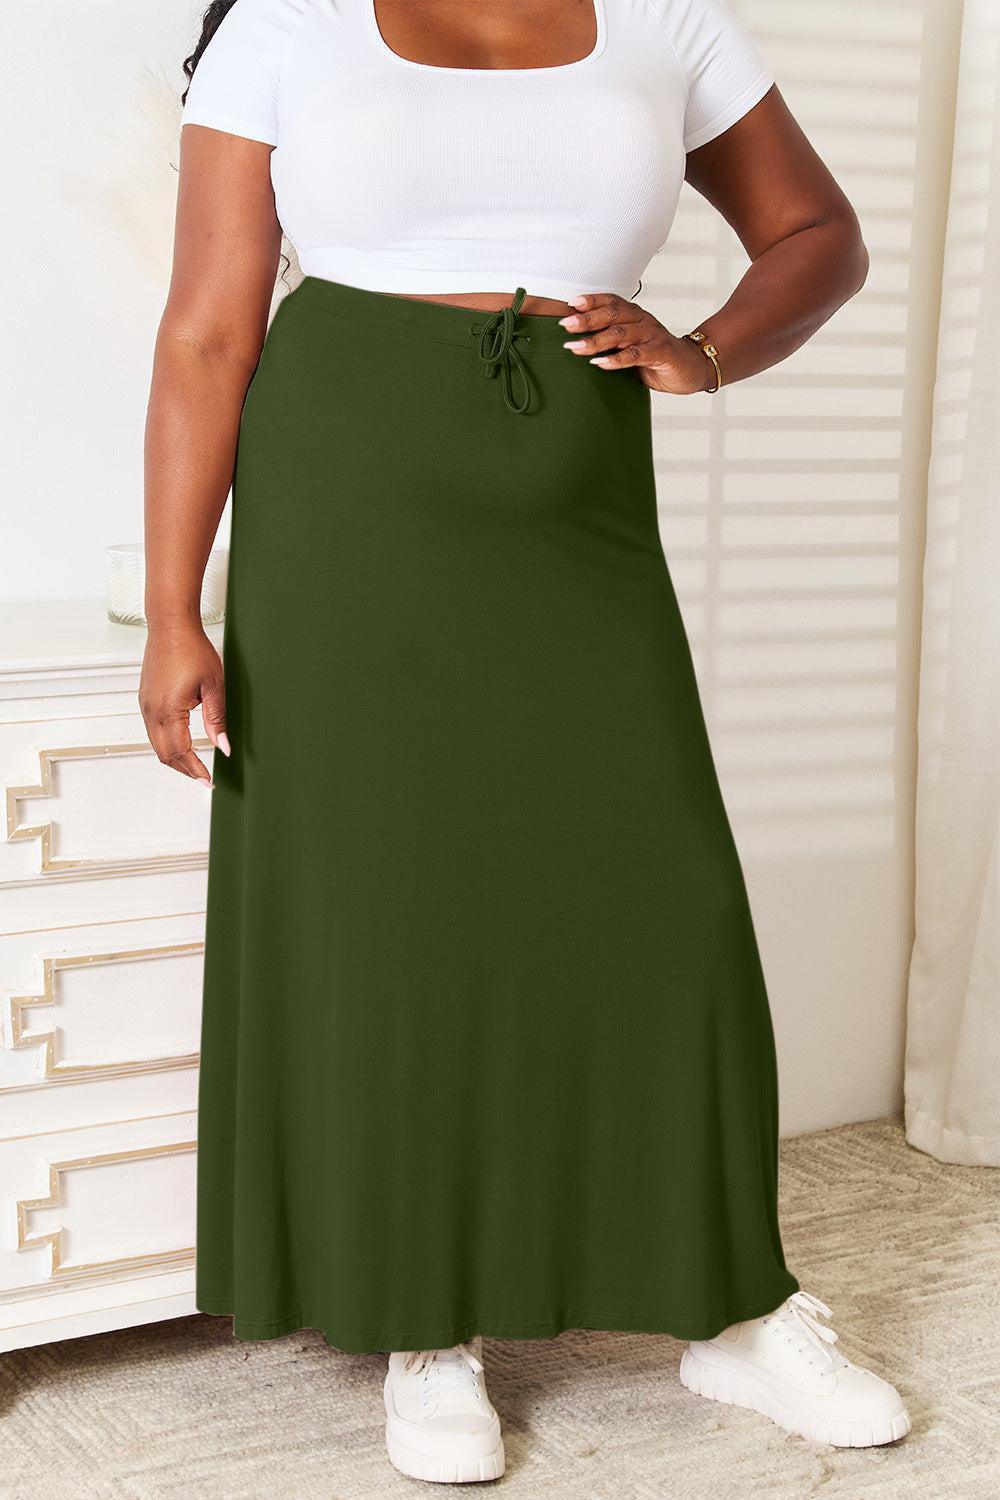 a woman in a white top and green skirt